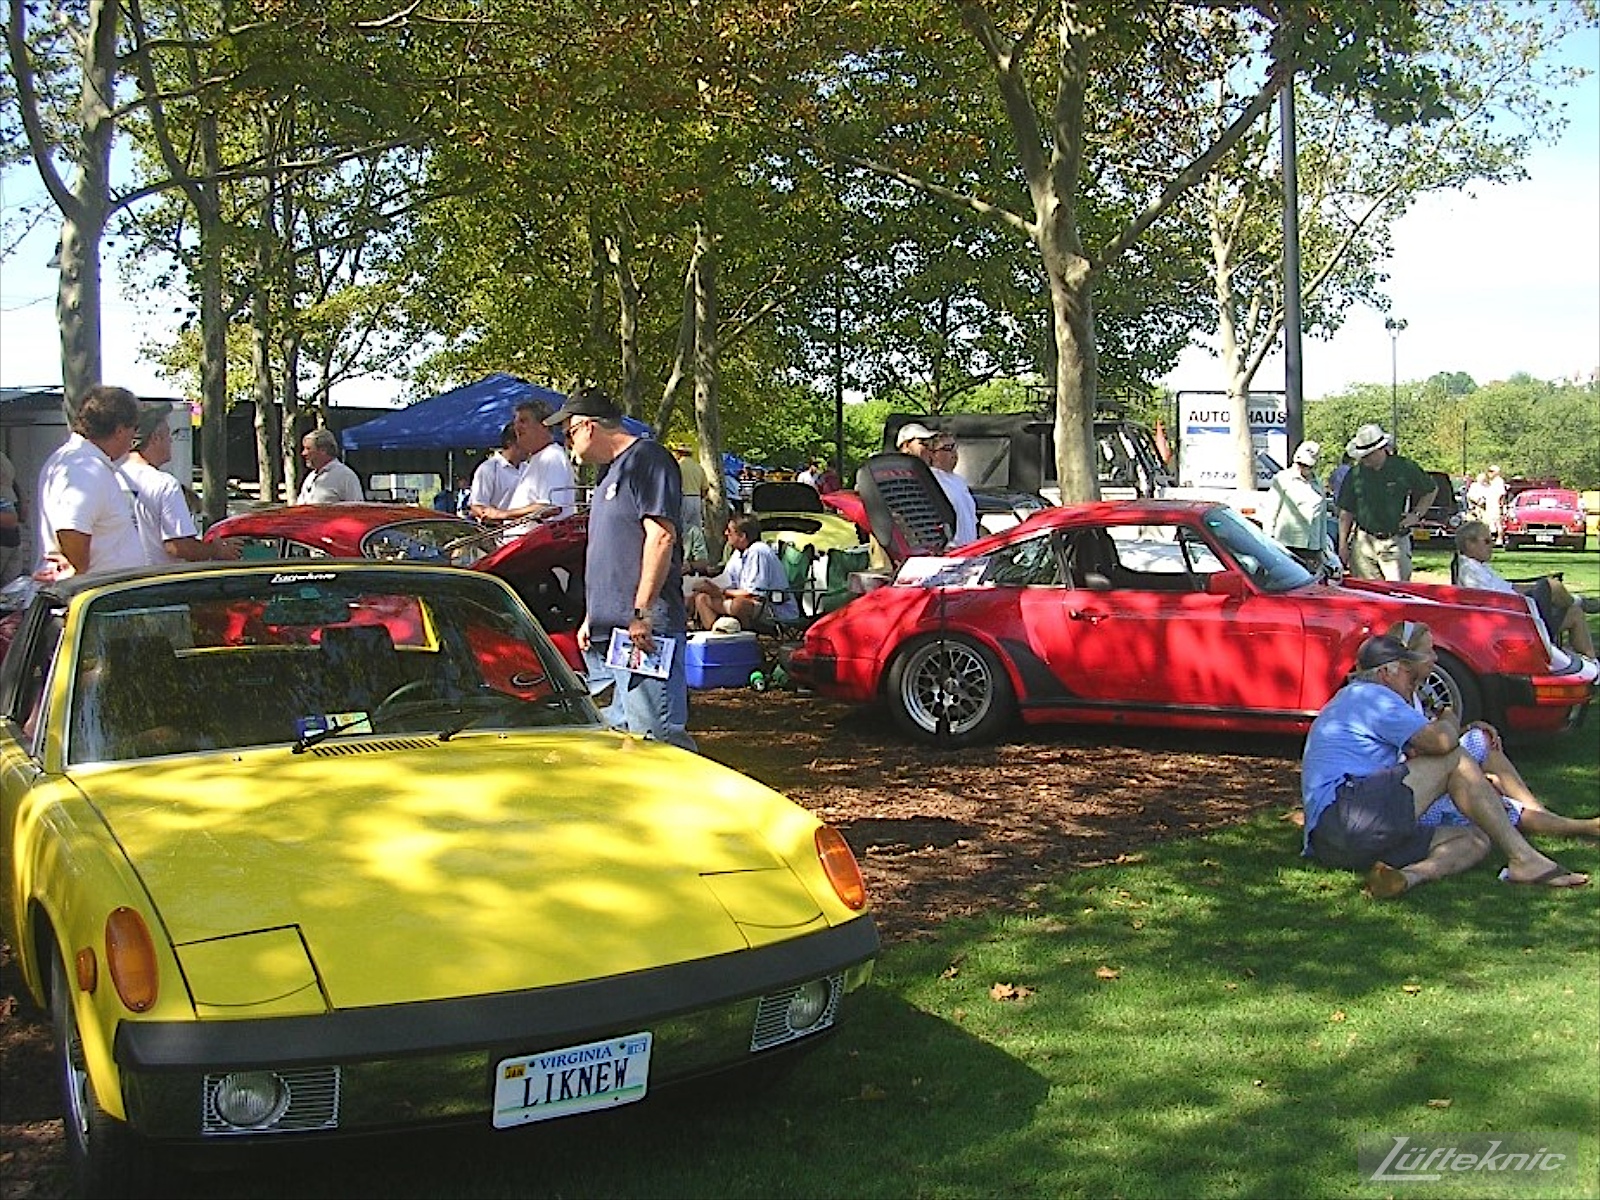 A restored yellow Porsche 914 on display with other Porsches at a car show.